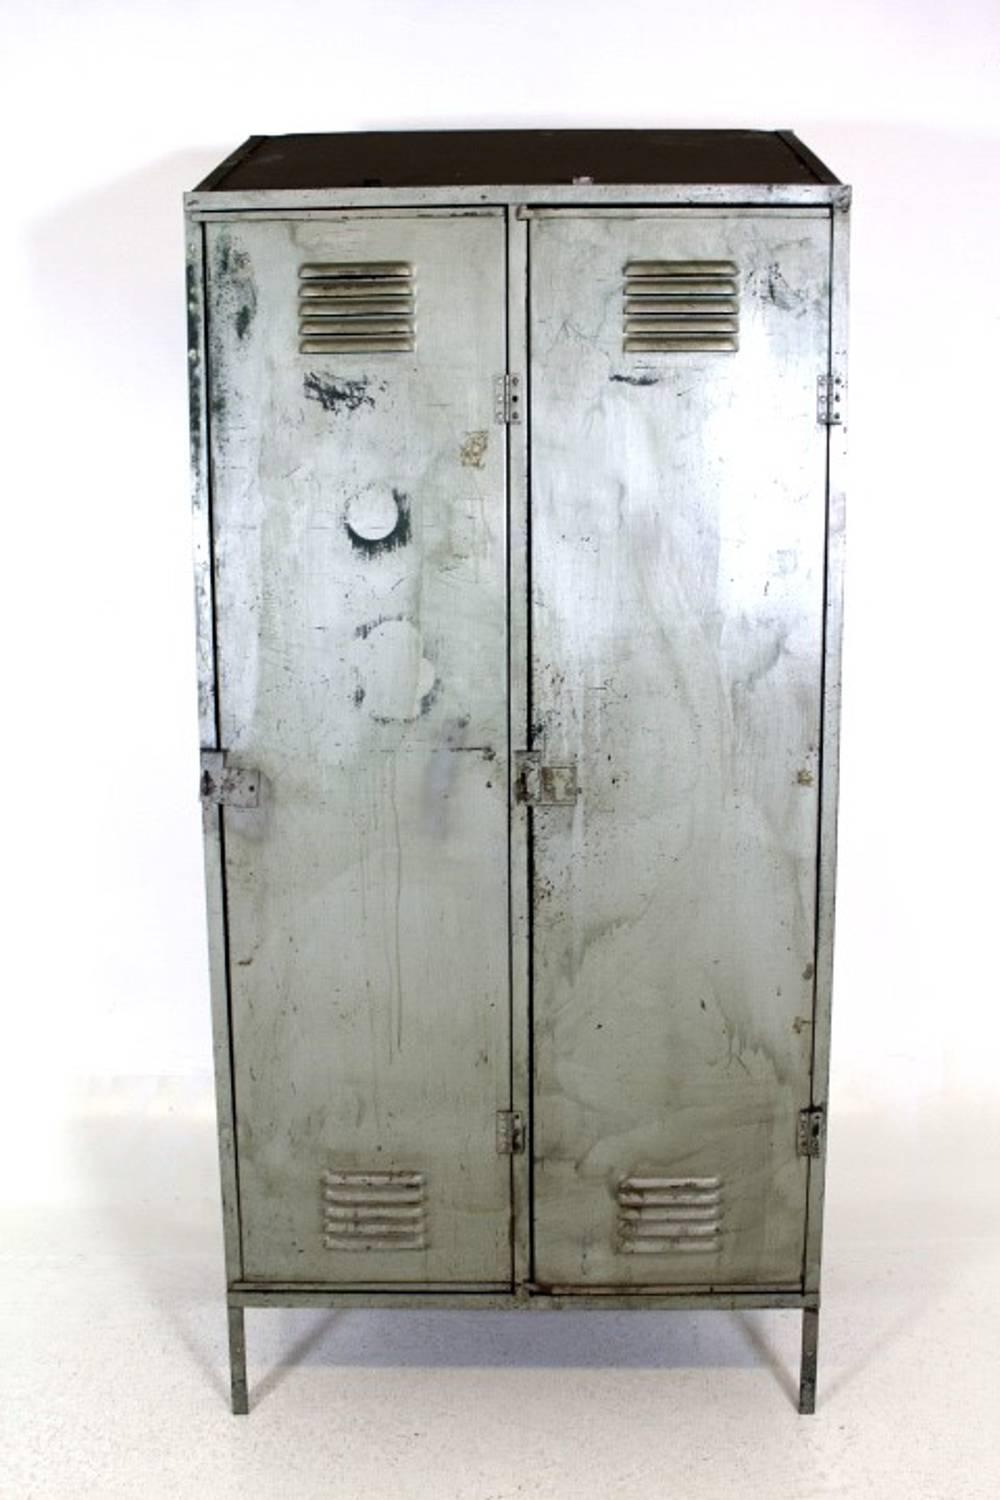 Gray Industrial locker. This vintage locker was used by workers in a factory in Sweden.
Today it is often used as a wardrobe.